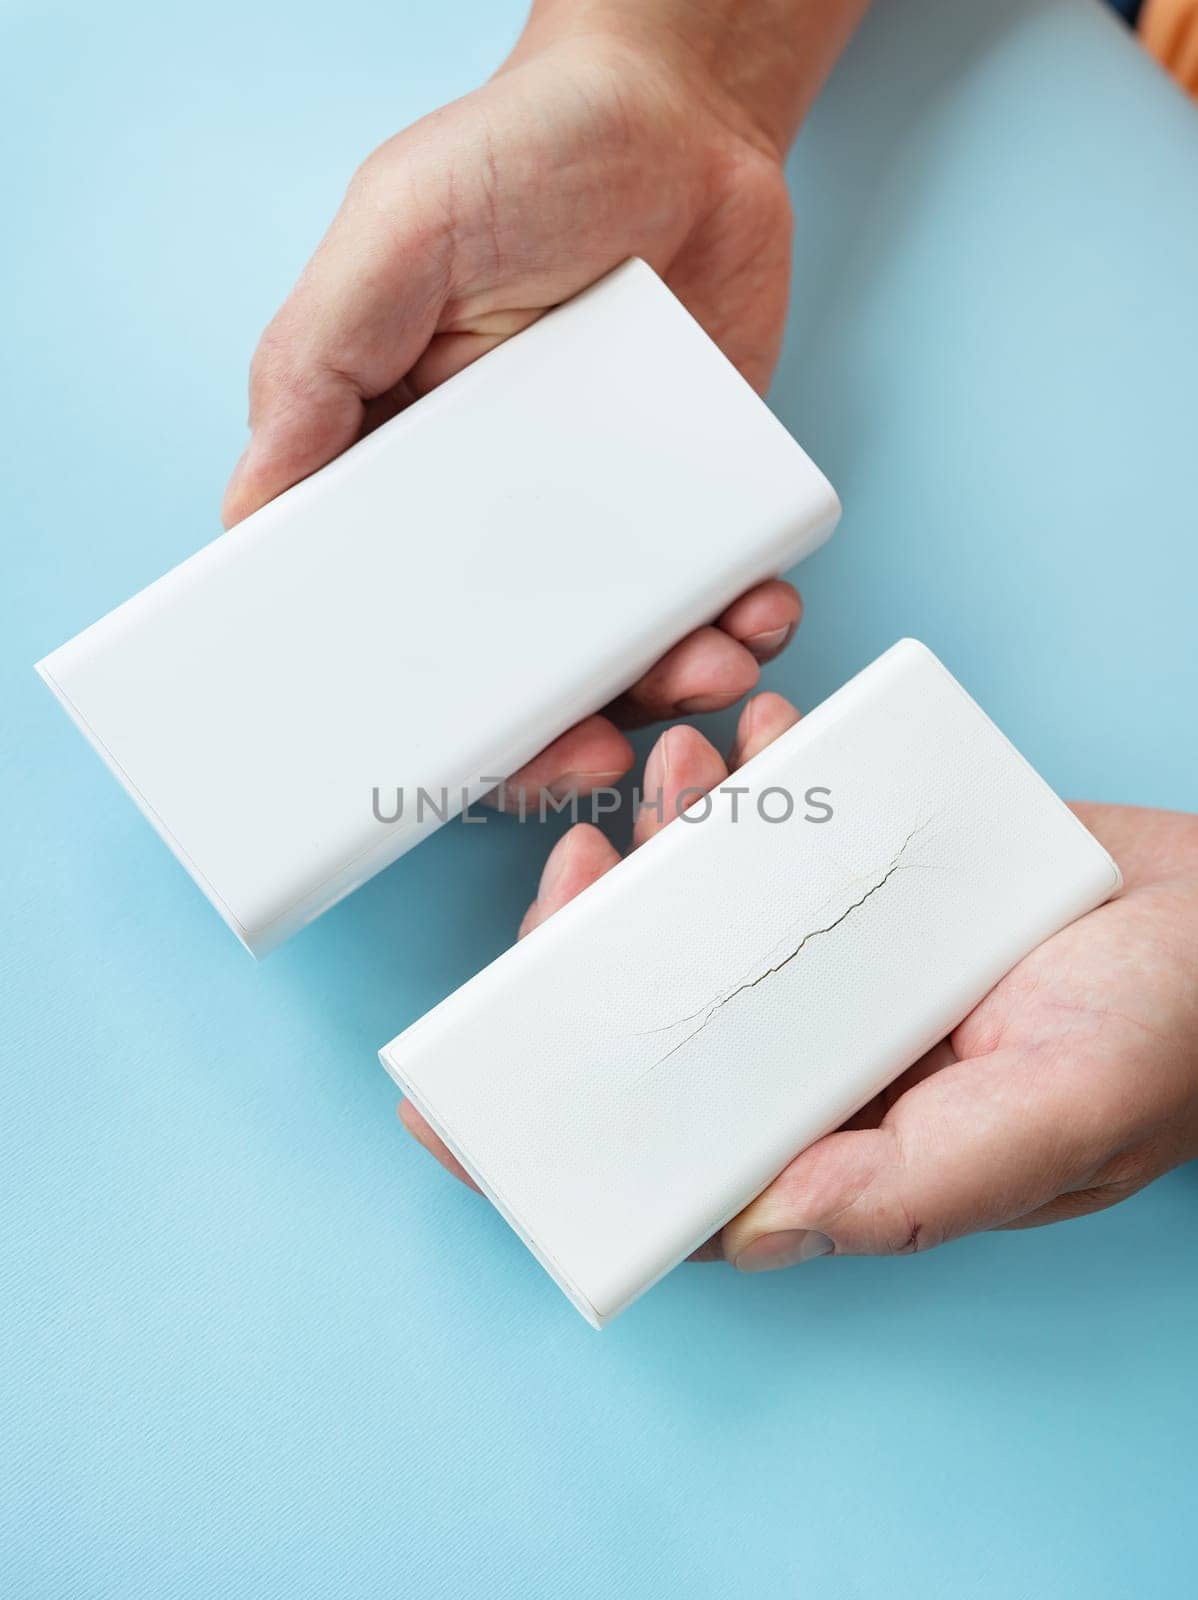 Hands comparing a new and a cracked power bank on a blue background. by sfinks